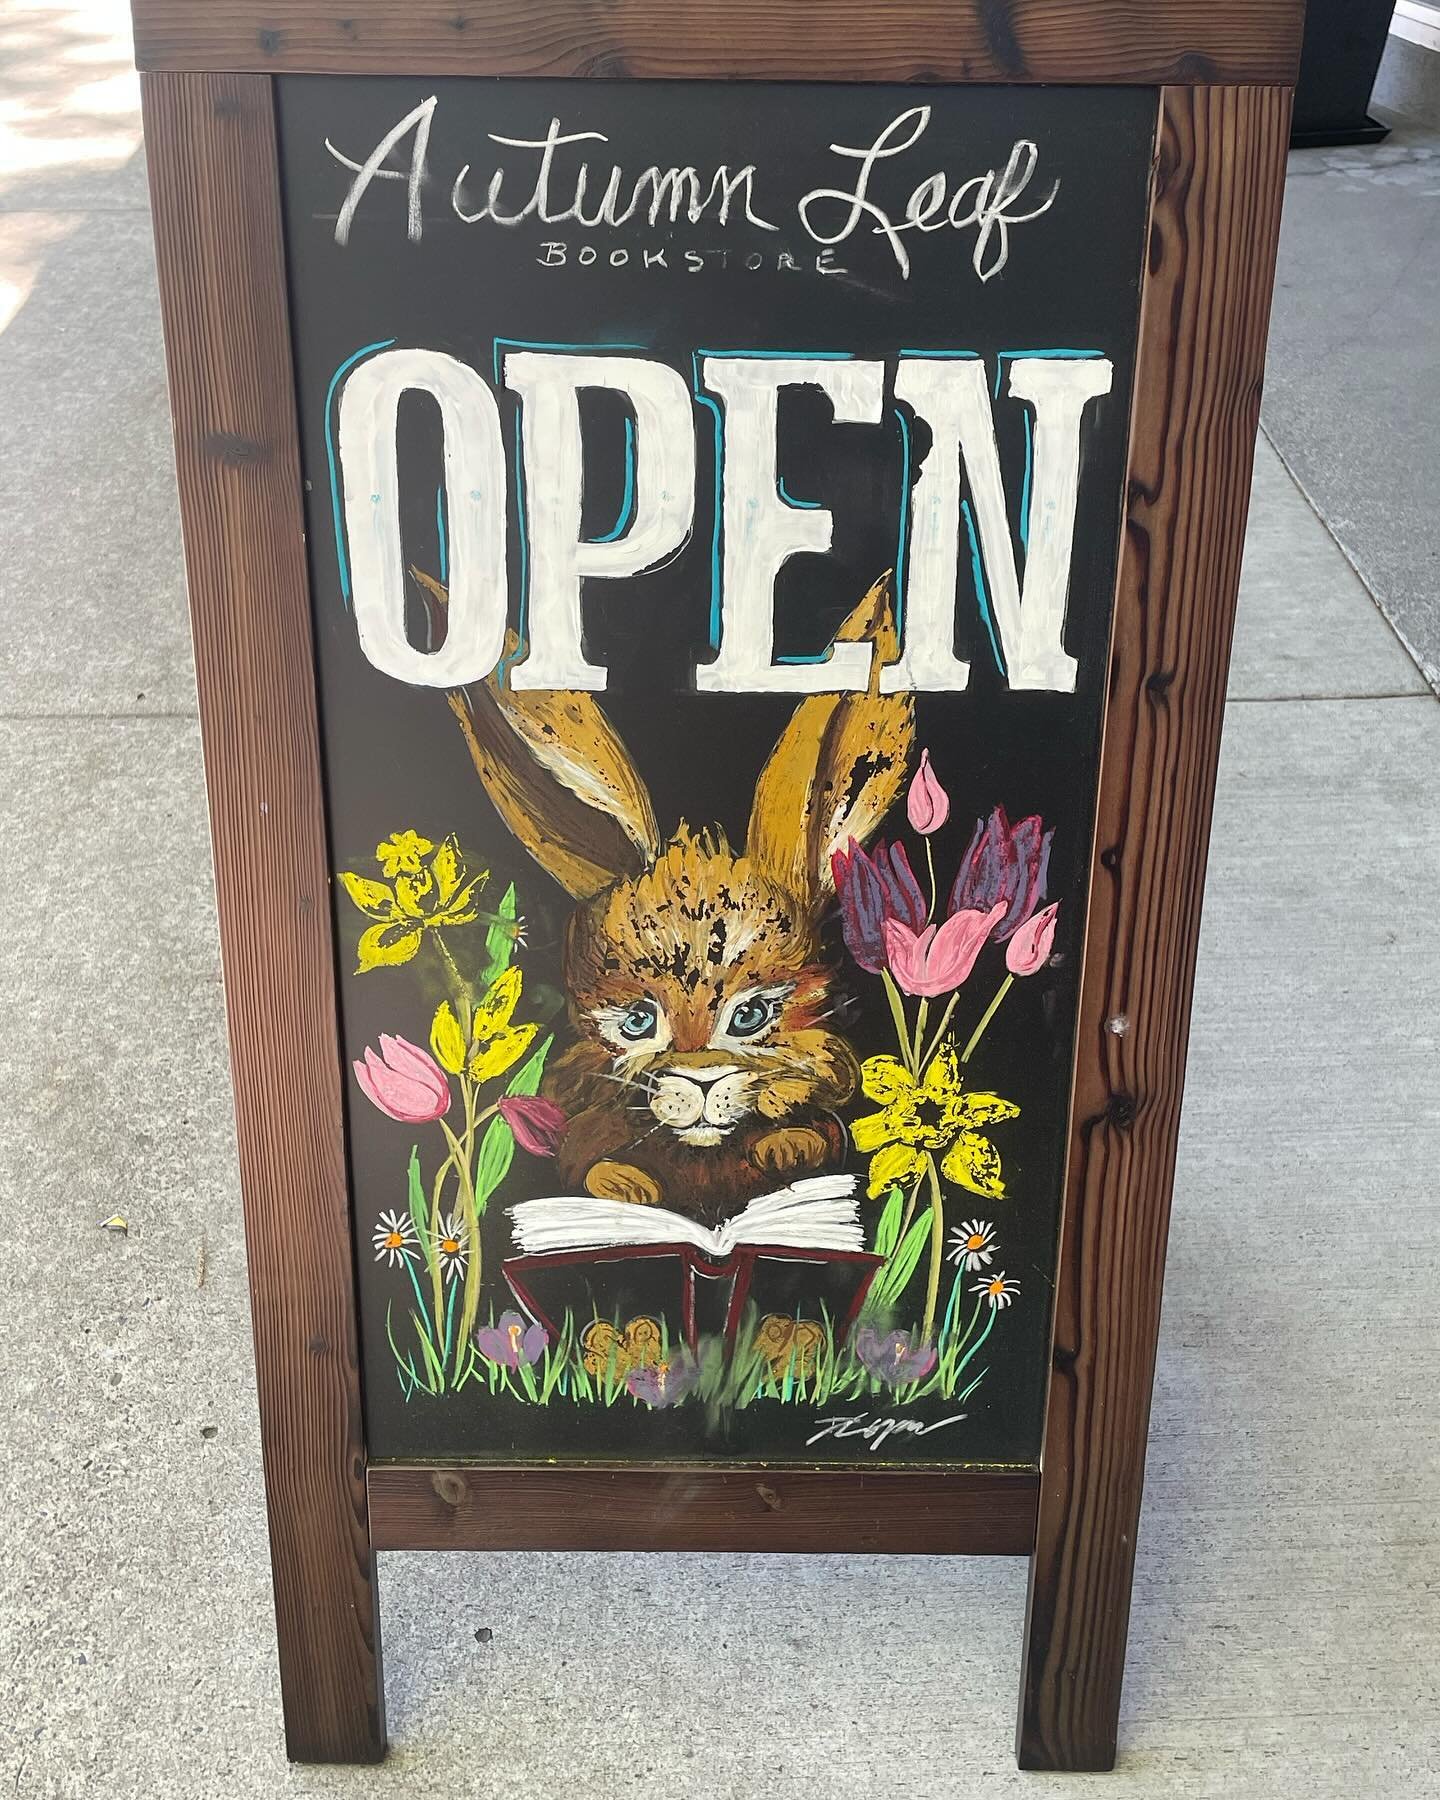 Henry has scurried to downtown Camas to find a new spot in town to share his escapades! 
The Adventures of Henry the Field Mouse is now on the local author shelves @autumnleafbookstore 

Big thanks to Eden for supporting local authors! 
🐭🐴🐰🦊🦔❣️❣